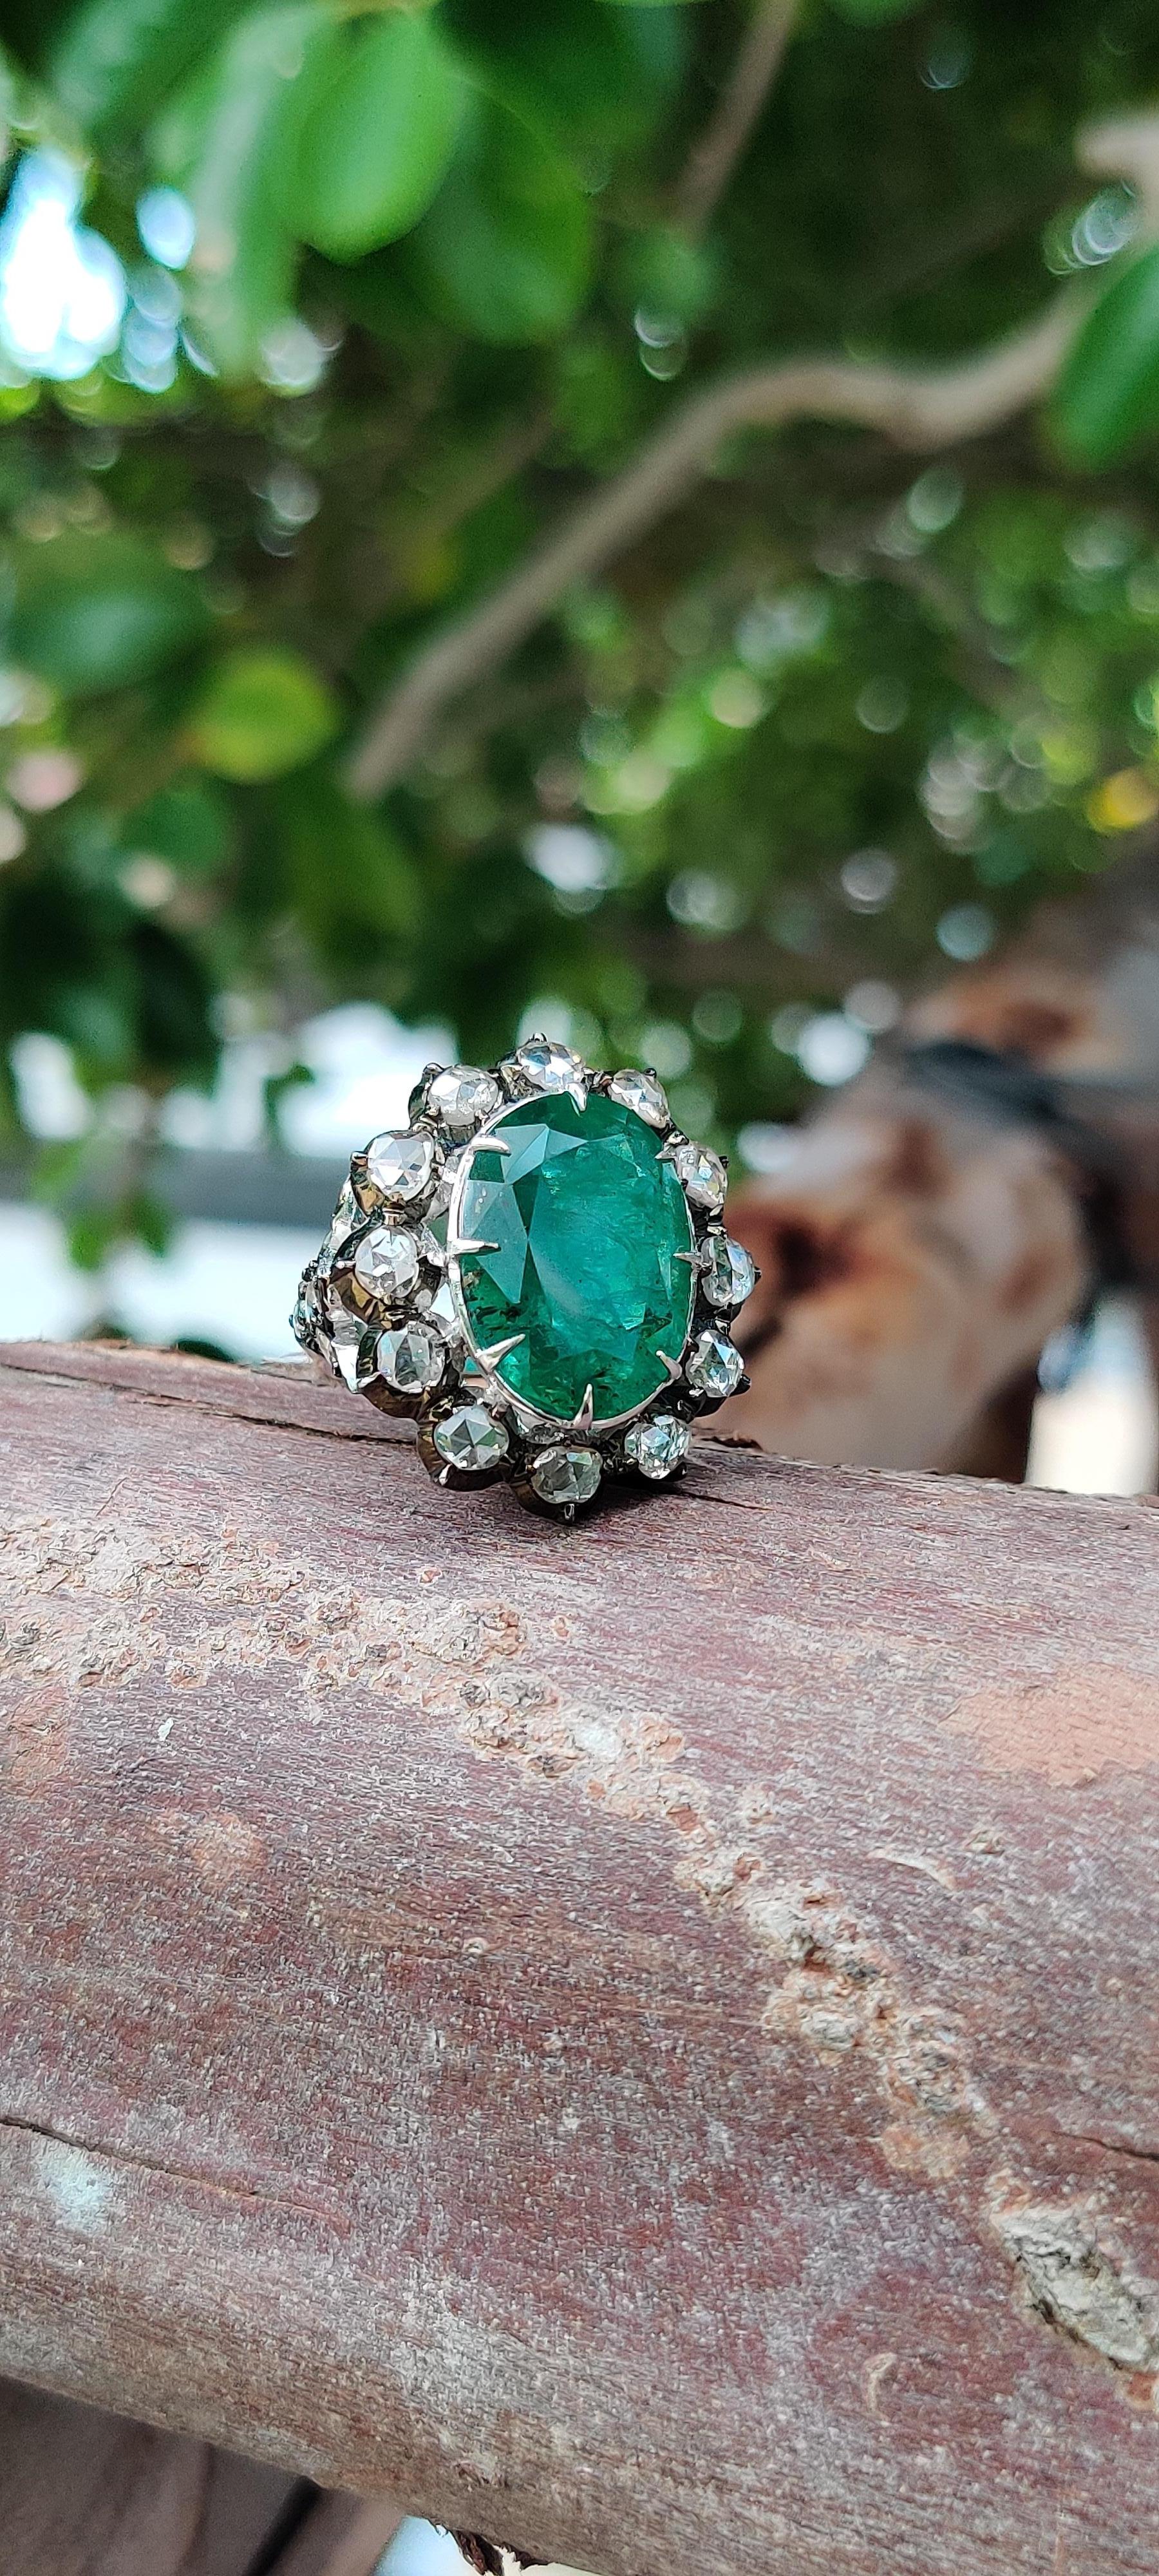  8.9 Ct Zambian Emerald Art Deco Ring with Rose Cut Diamonds in 14K White Gold For Sale 3